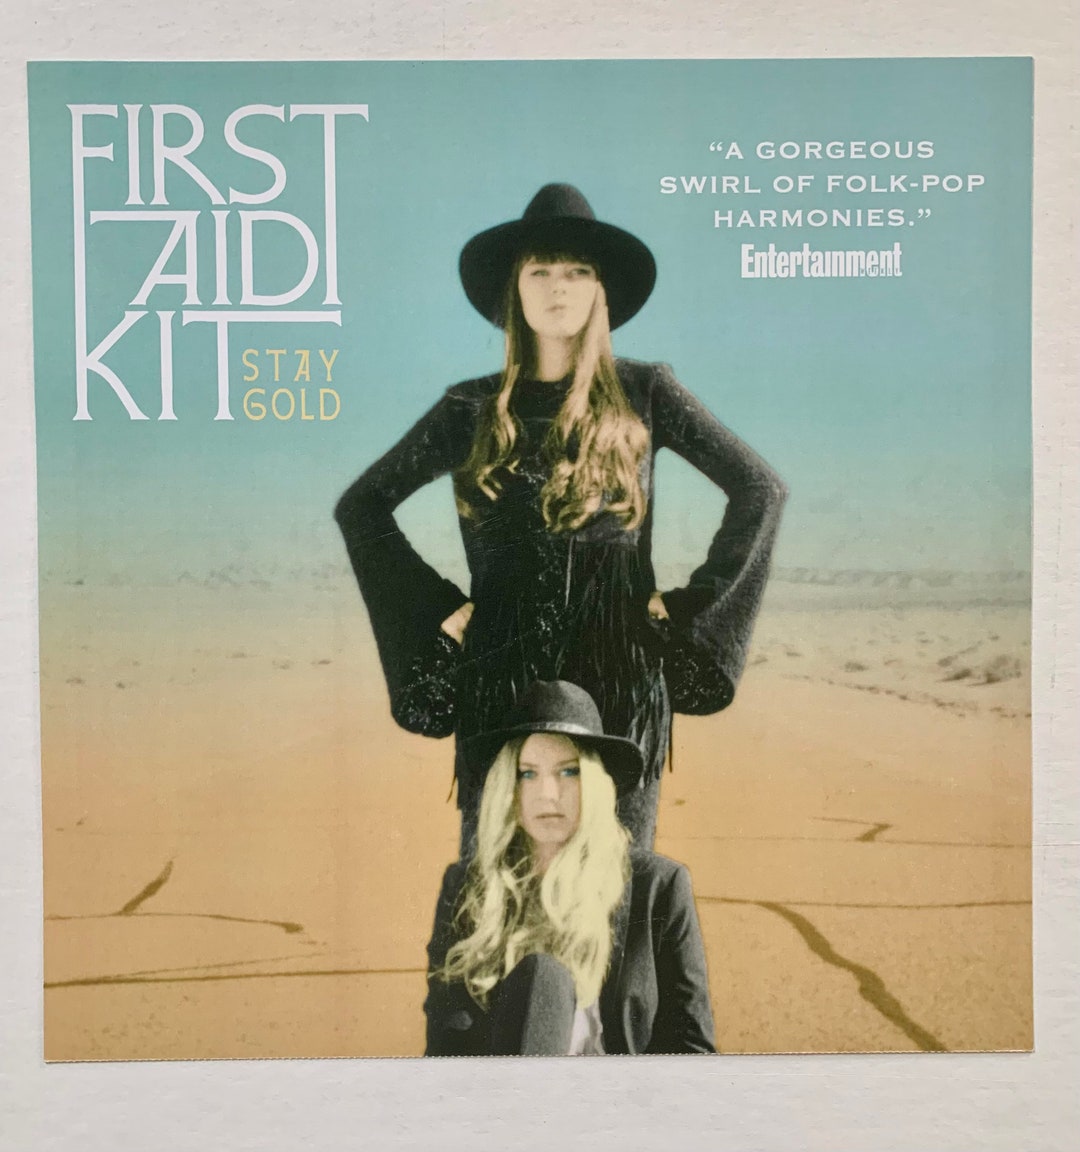 FIRST AID KIT  STAY GOLD